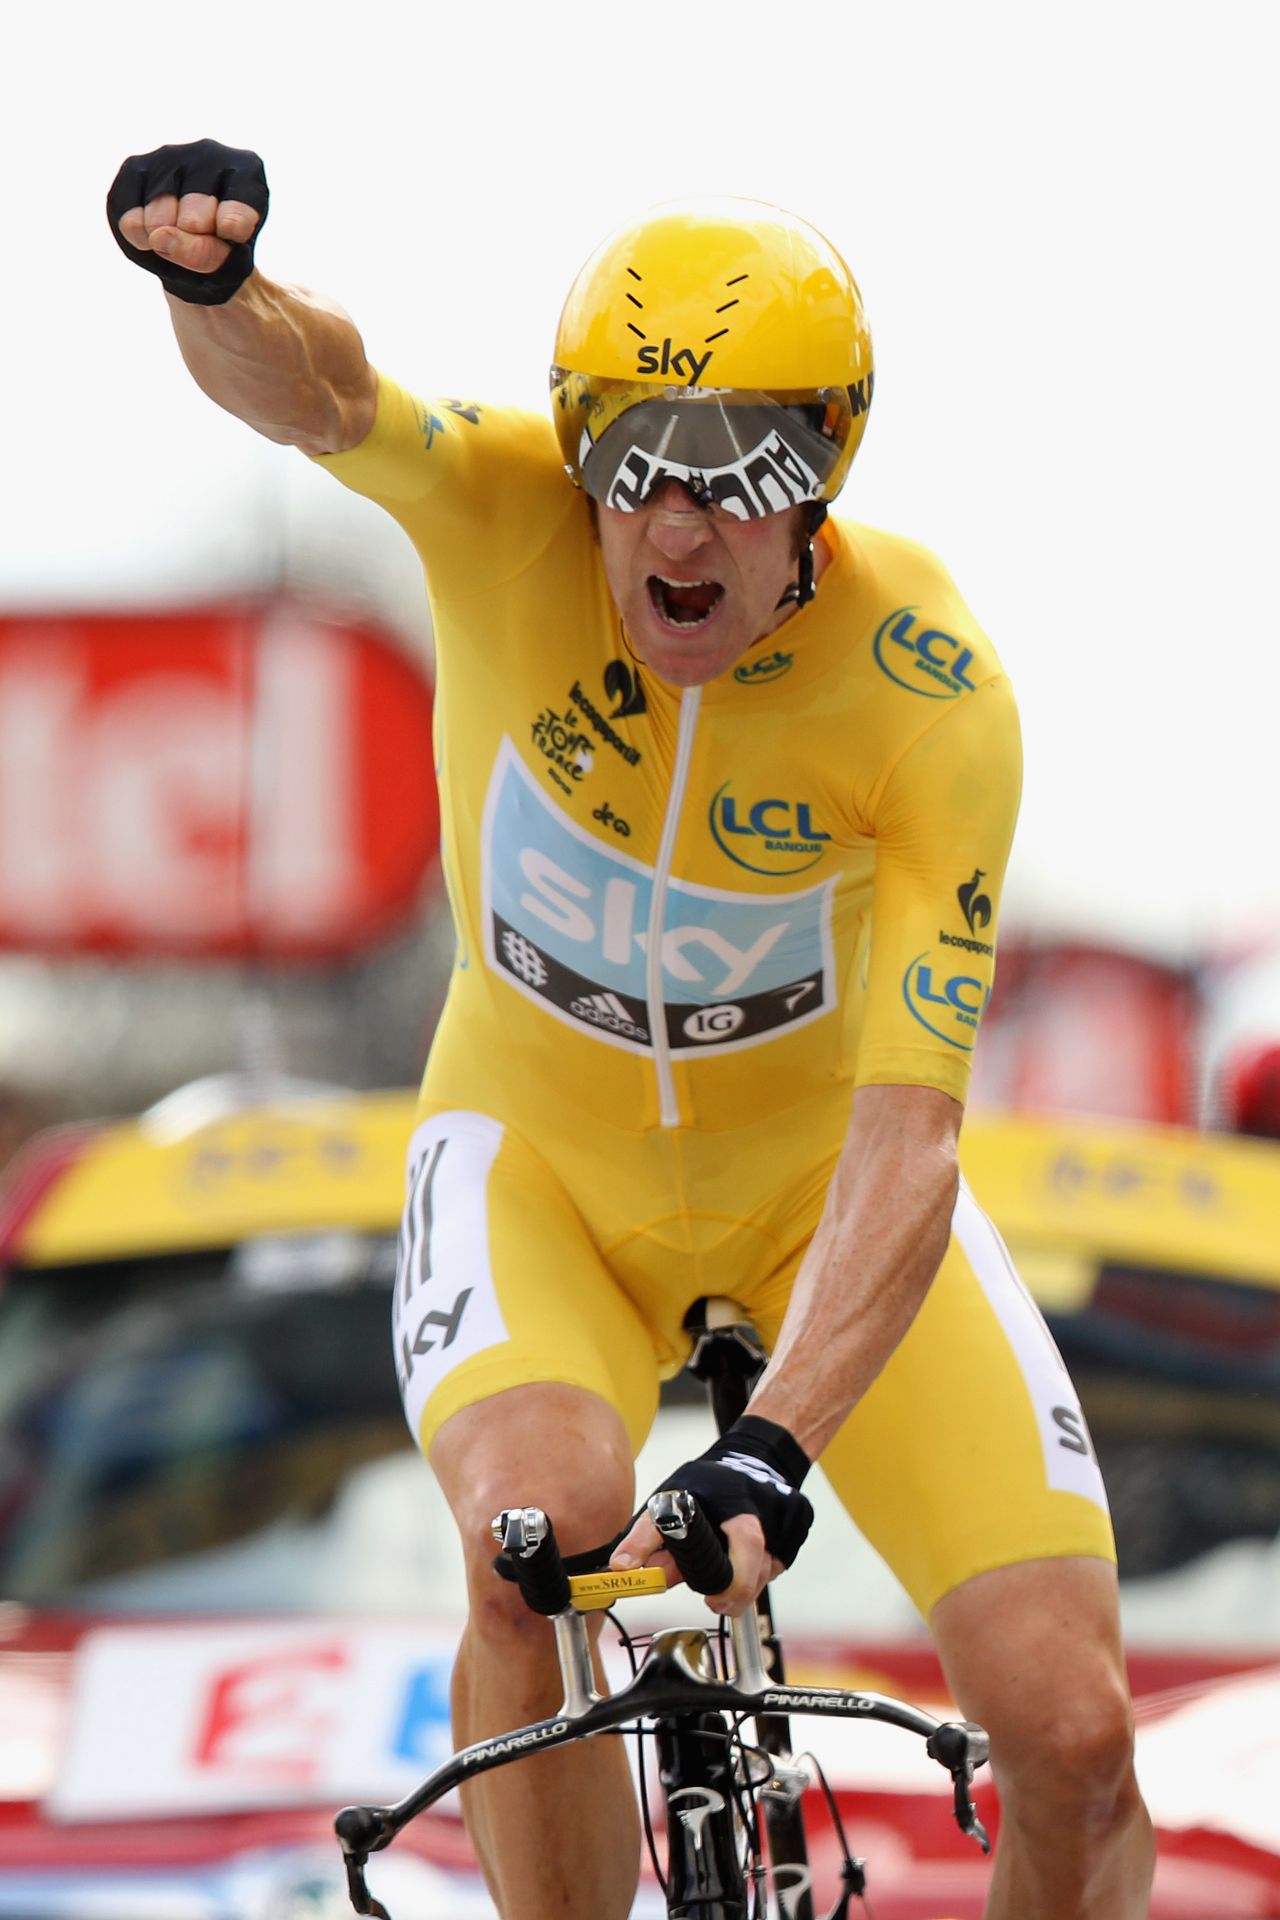 Wiggins punches the air after winning the stage 19 time trial at the 2012 Tour de France.